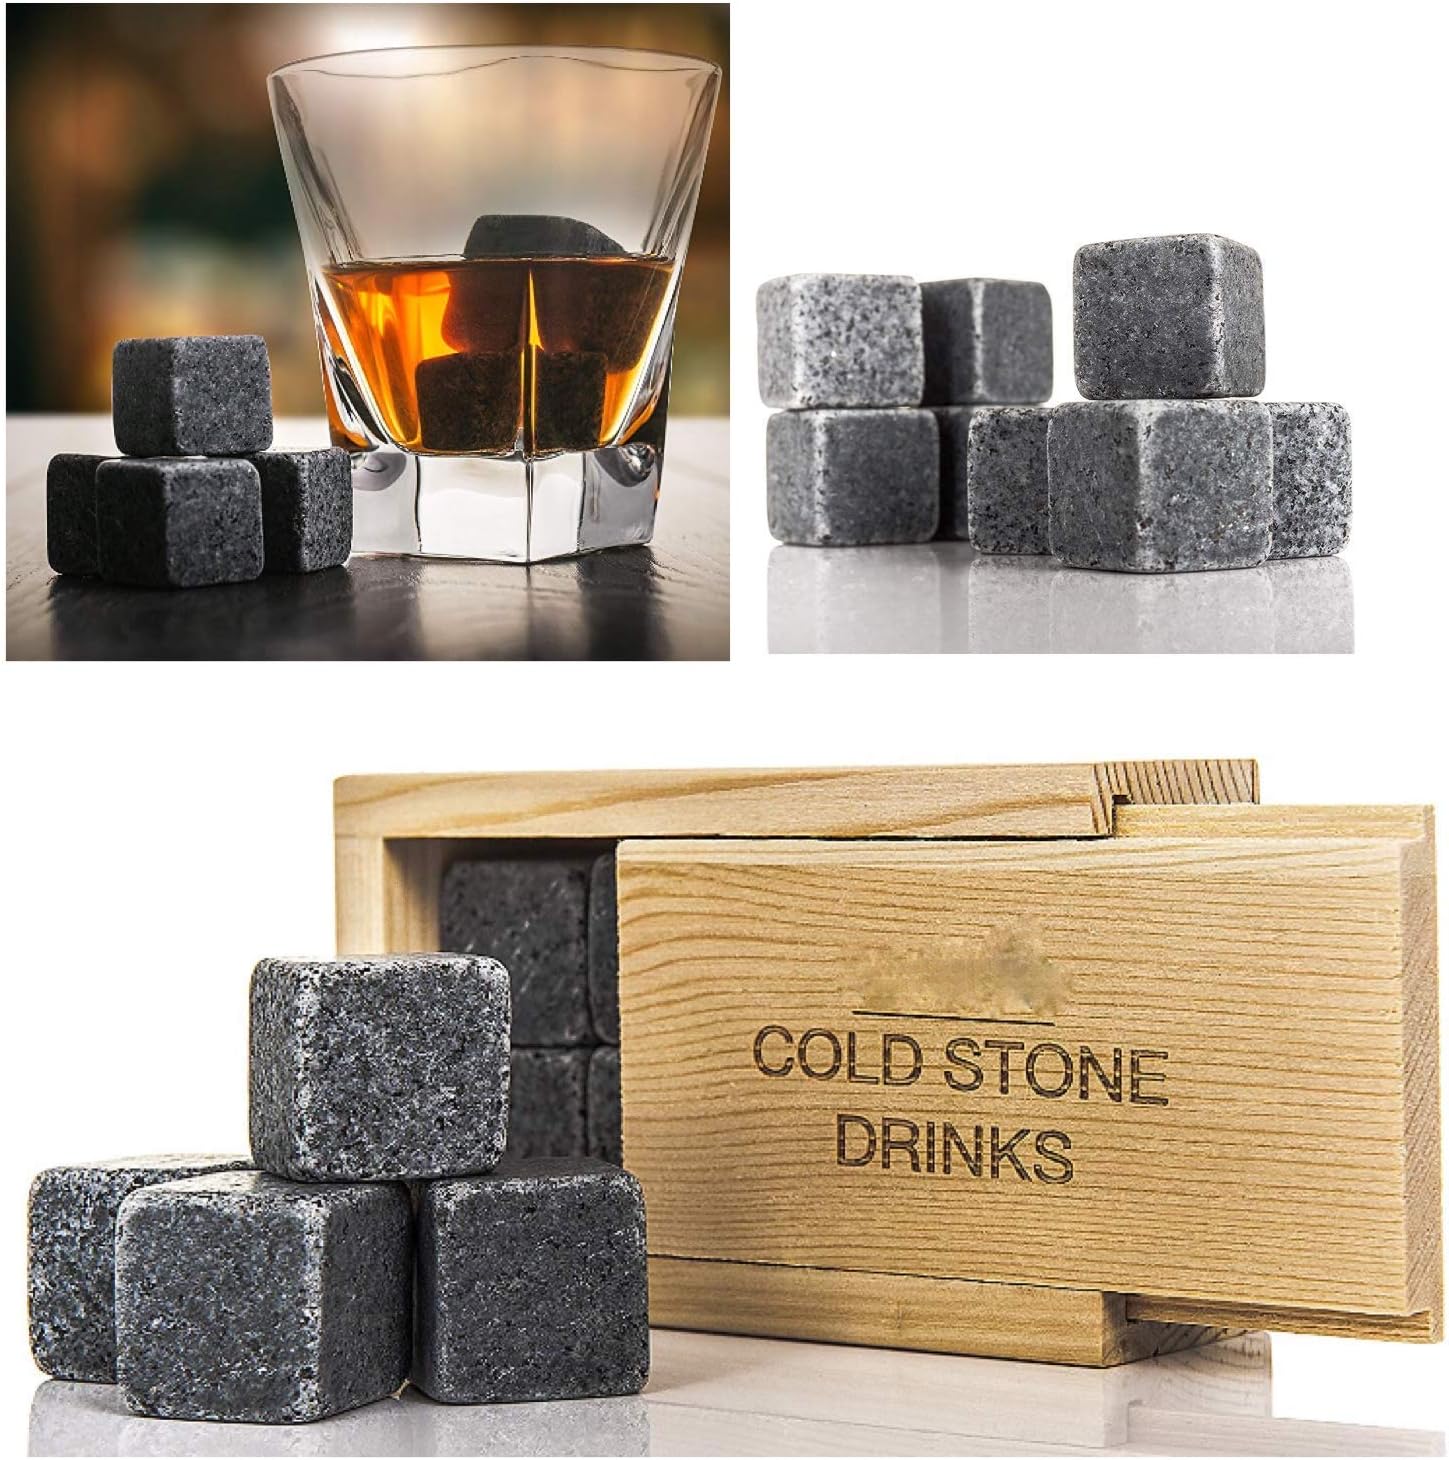 ADEPTNA Premium 8pc Whisky Ice Stones Drink Cooler Cubes Whiskey Scotch Rocks Granite Comes in Exclusive Wooden Domino Box- It's an Extremely Awesome Gift Idea for Men